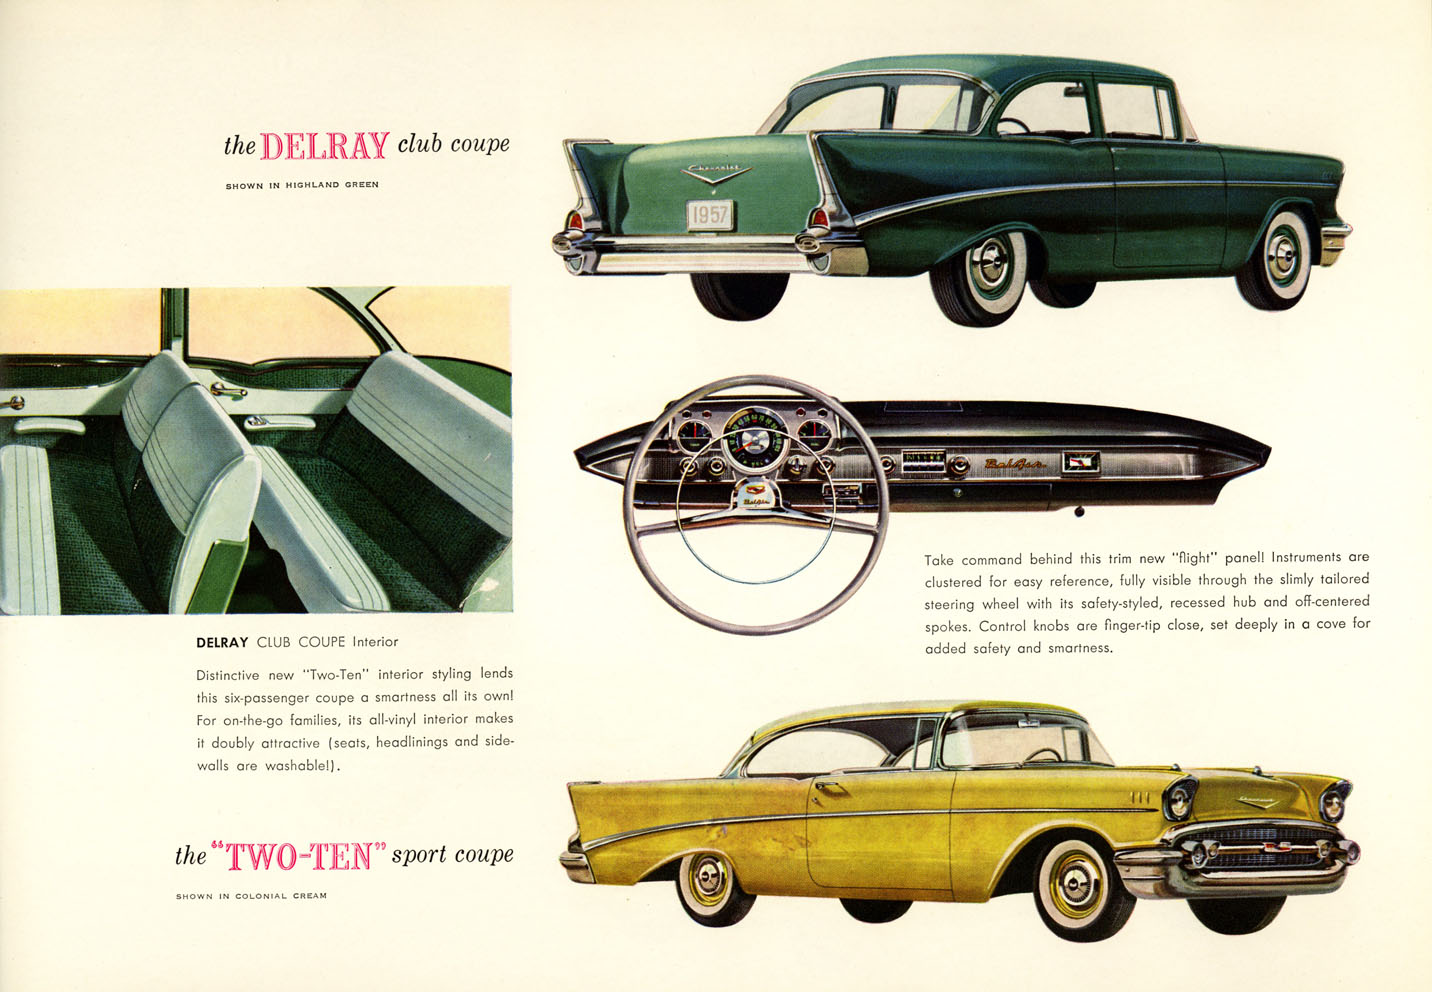 57 Chevy wagons were “born with a wanderlust”